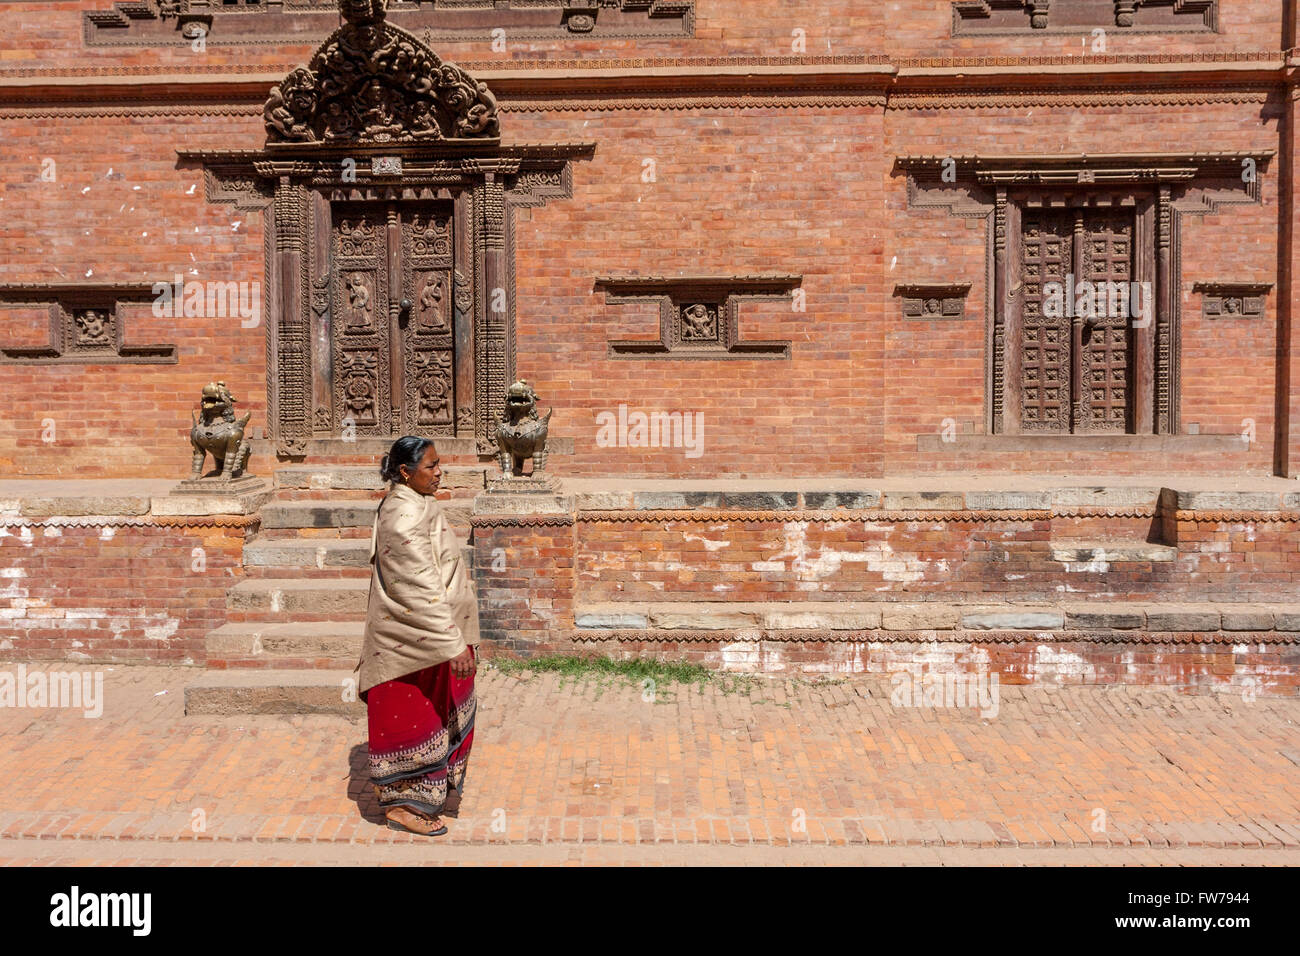 Bhaktapur, Nepal.  Woman Walking Wearing the Traditional Red and Black Worn by Bhaktapur Women. Stock Photo